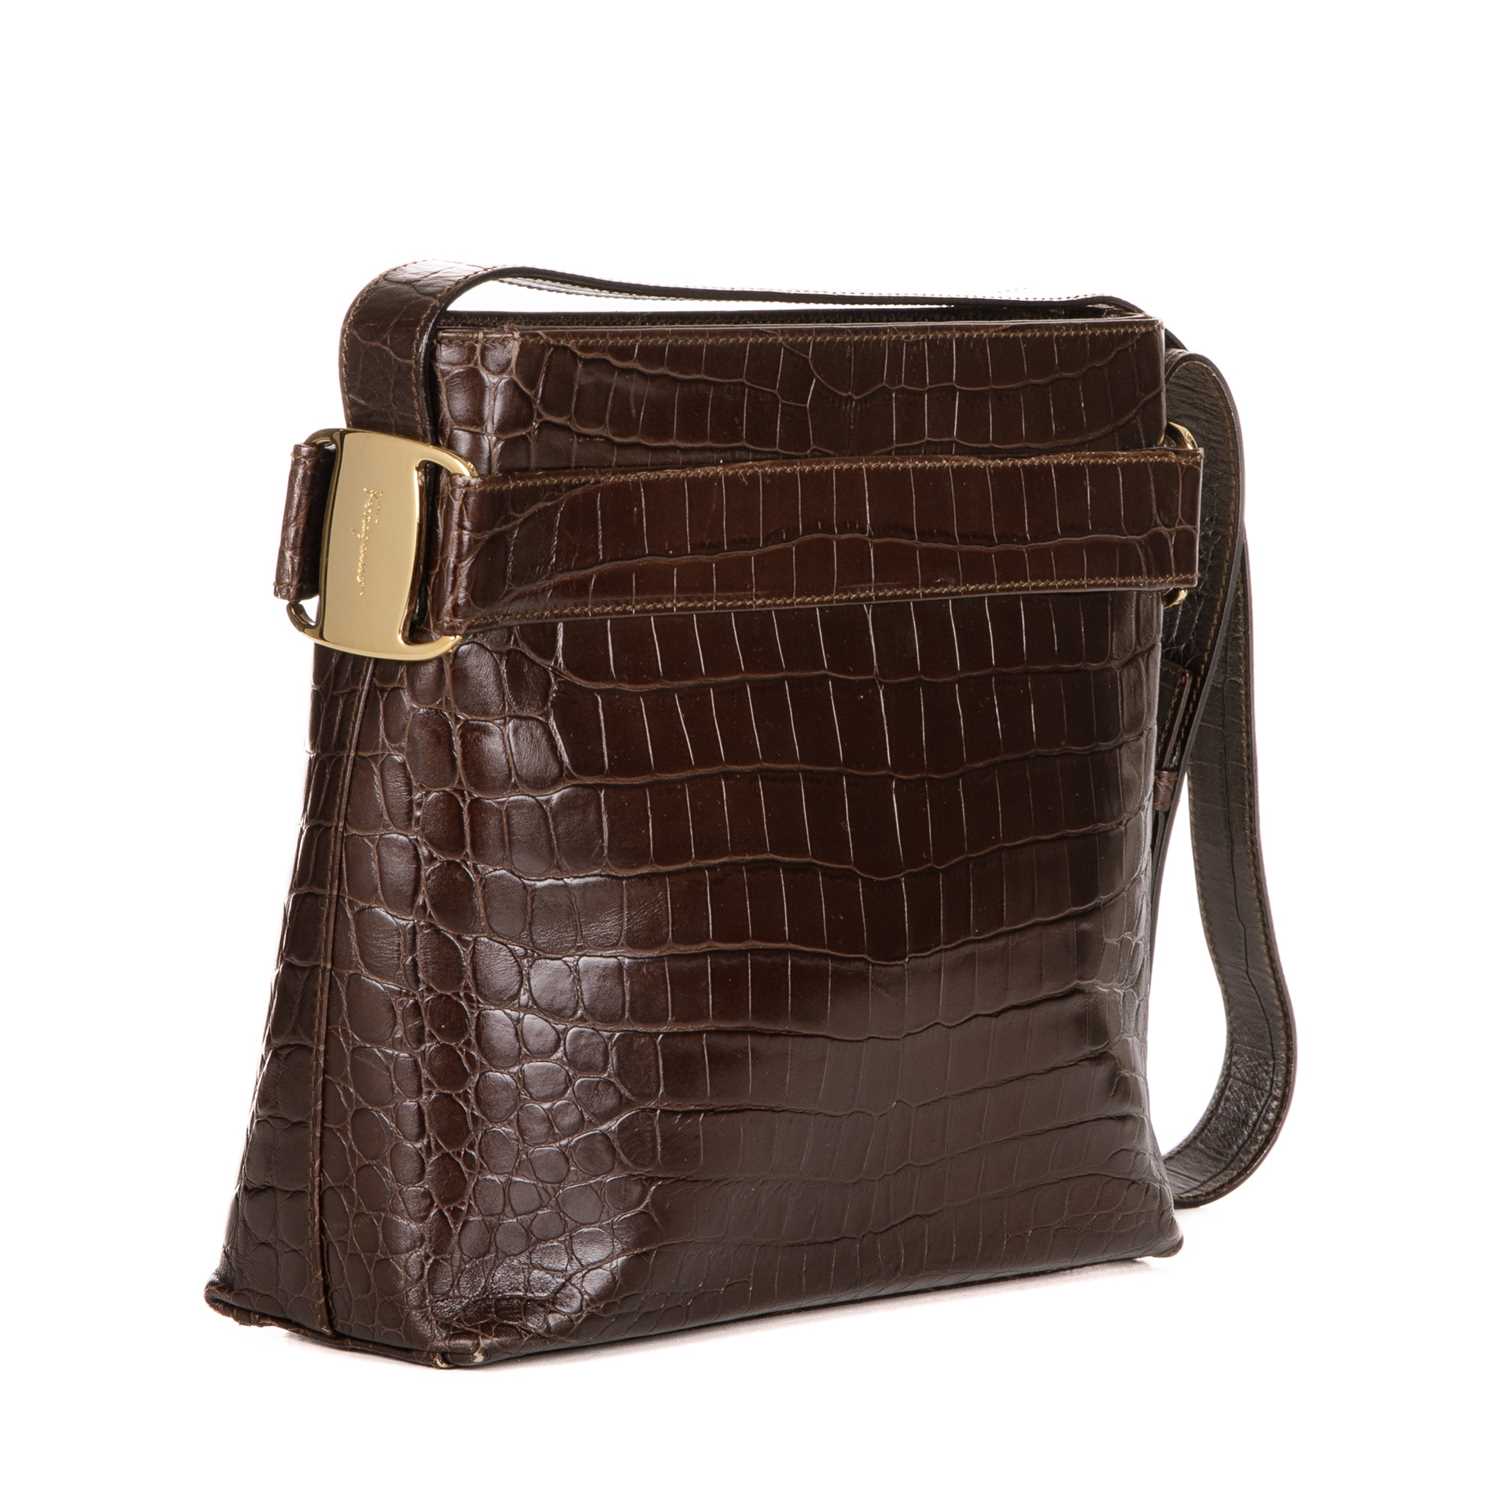 Salvatore Ferragamo, an embossed leather handbag, designed with a brown crocodile embossed leather - Image 4 of 4